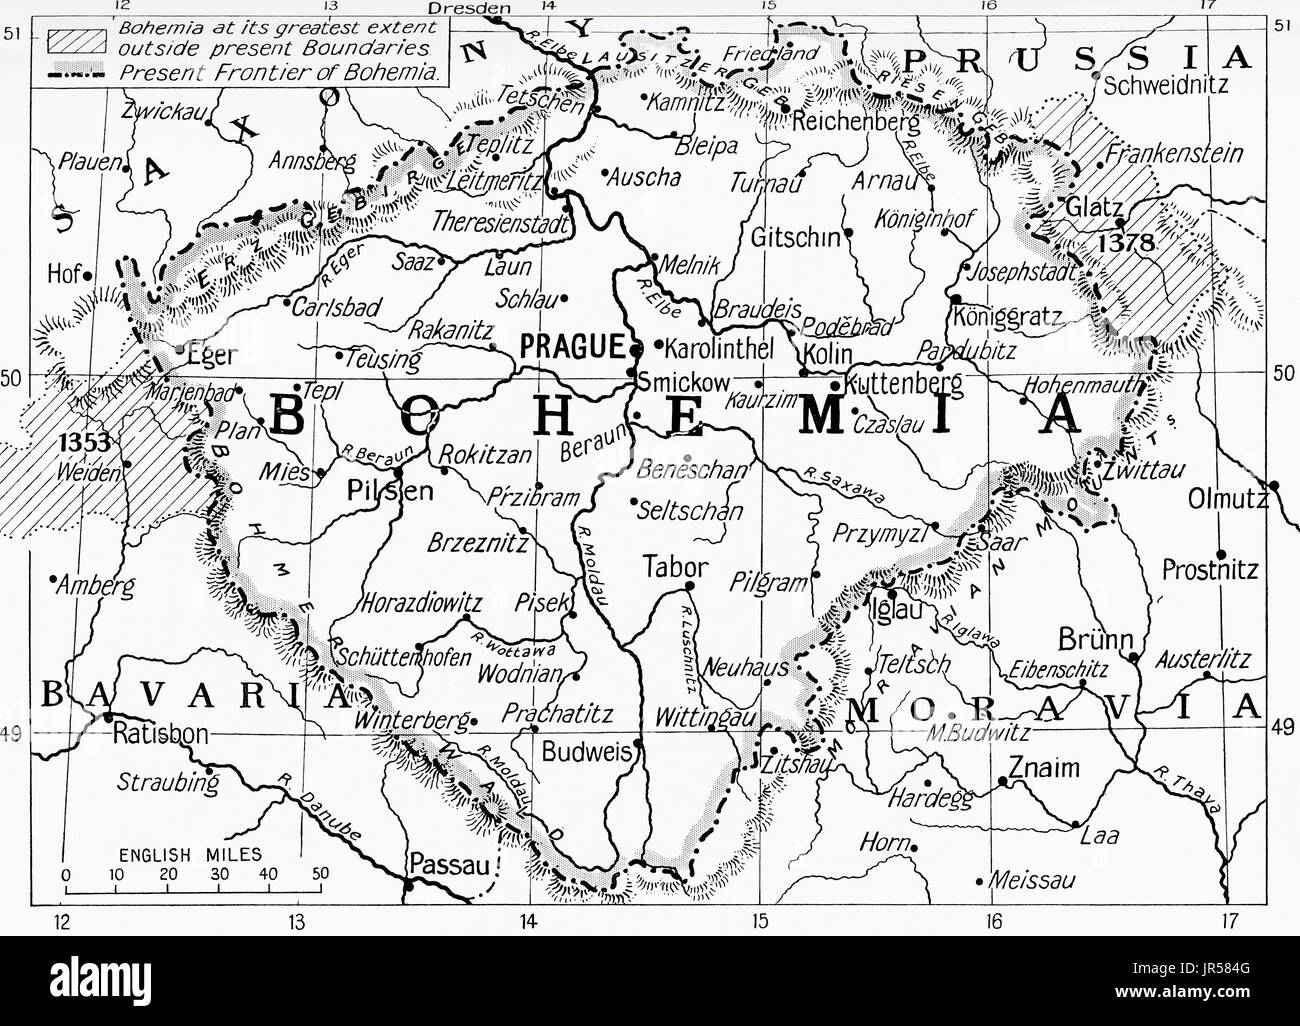 Map of Bohemia at the outbreak of WWI.  The lined areas show its extent in the 14th century, the dotted line shows its frontier in 1914.  From Hutchinson's History of the Nations, published 1915. Stock Photo